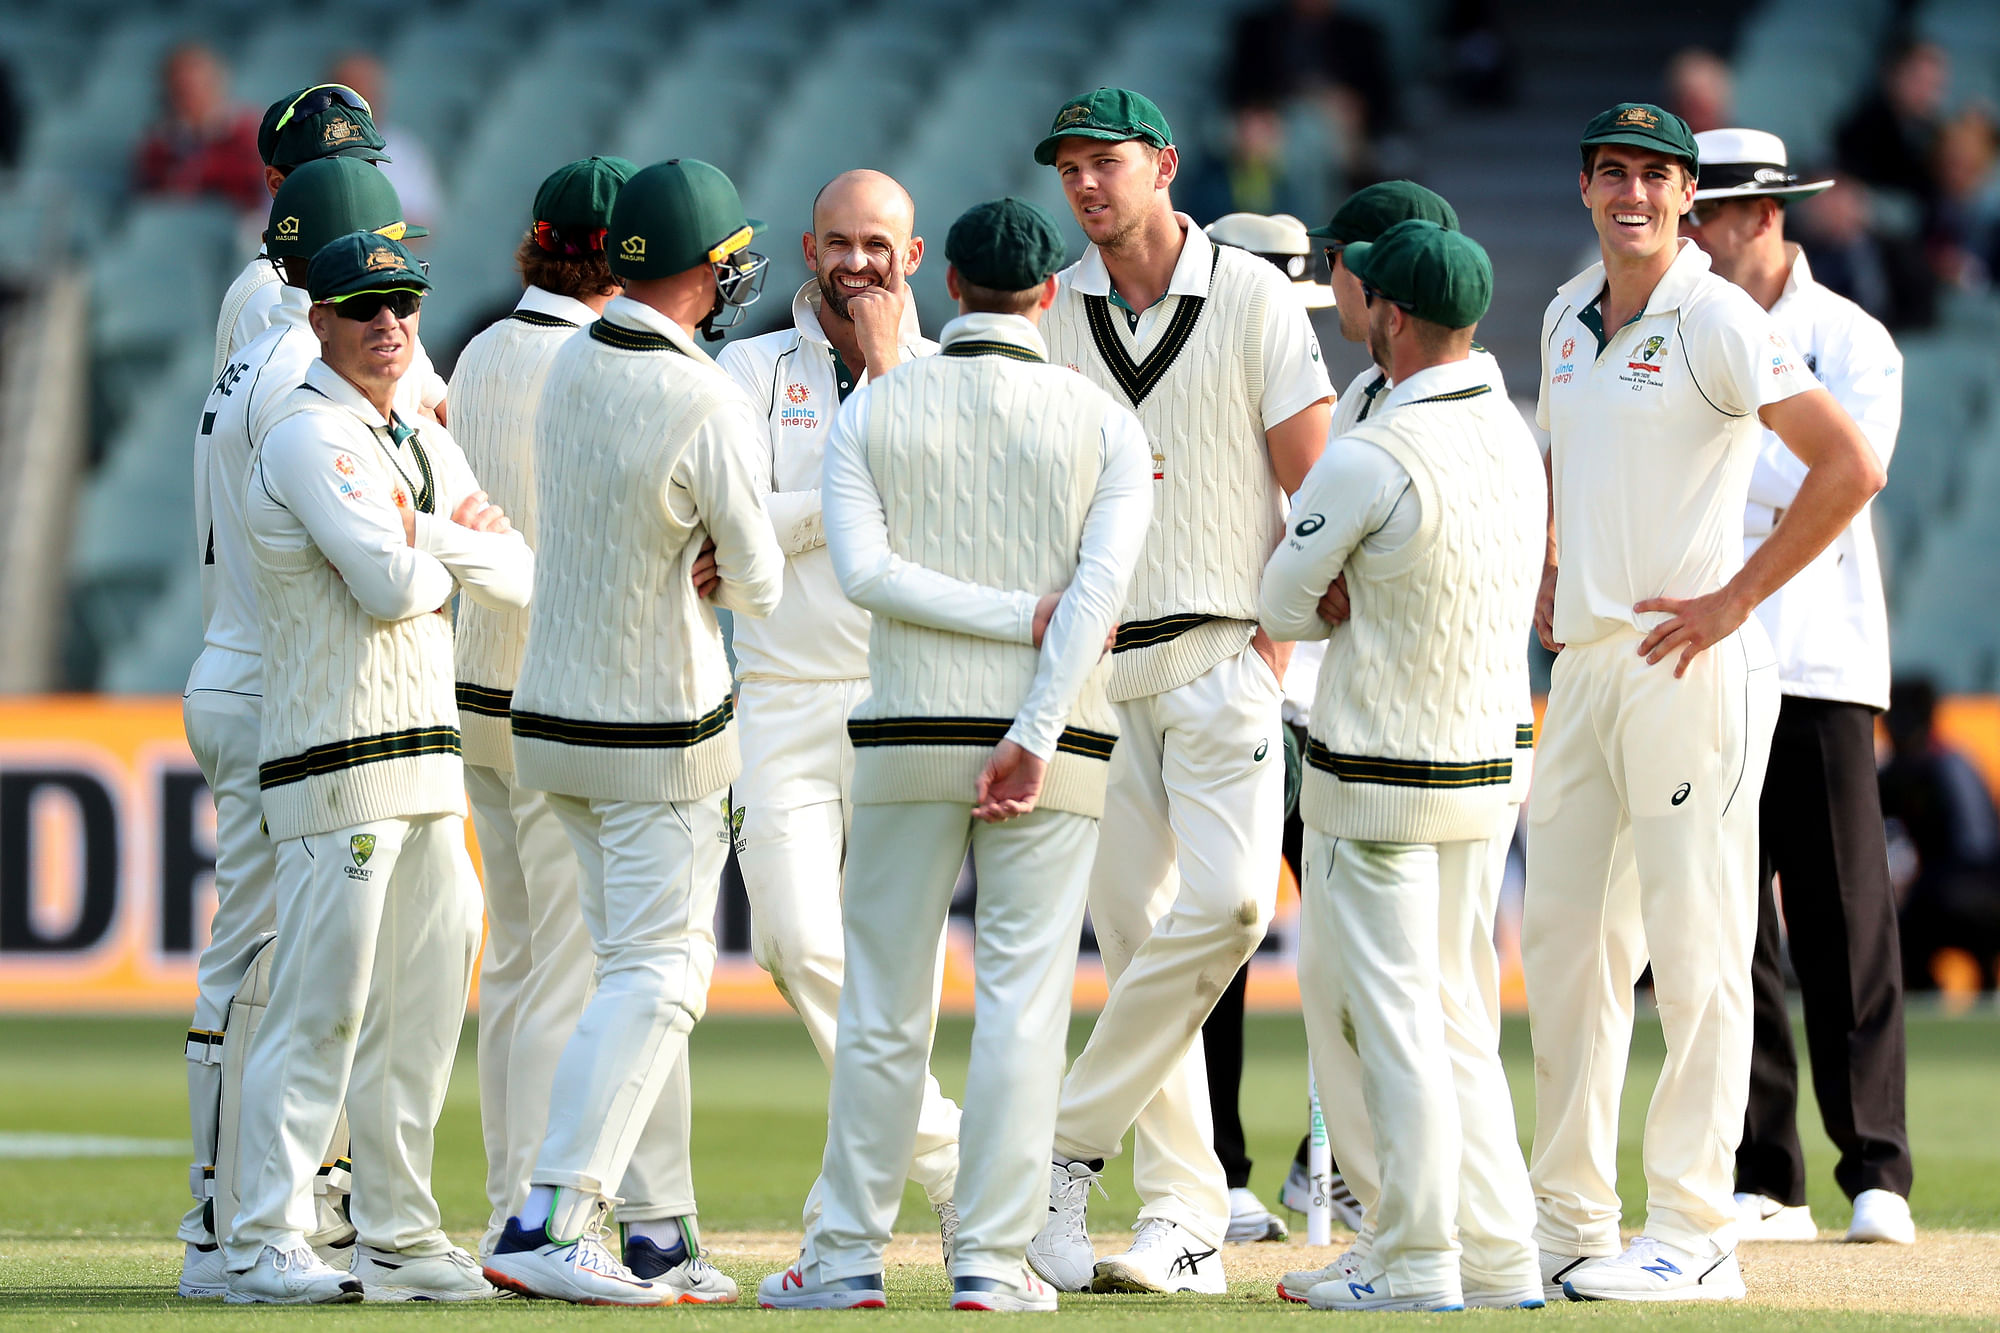 Australia’s Nathan Lyon celebrates the wicket of Pakistan’s Yasir Shah during their cricket Test match in Adelaide.